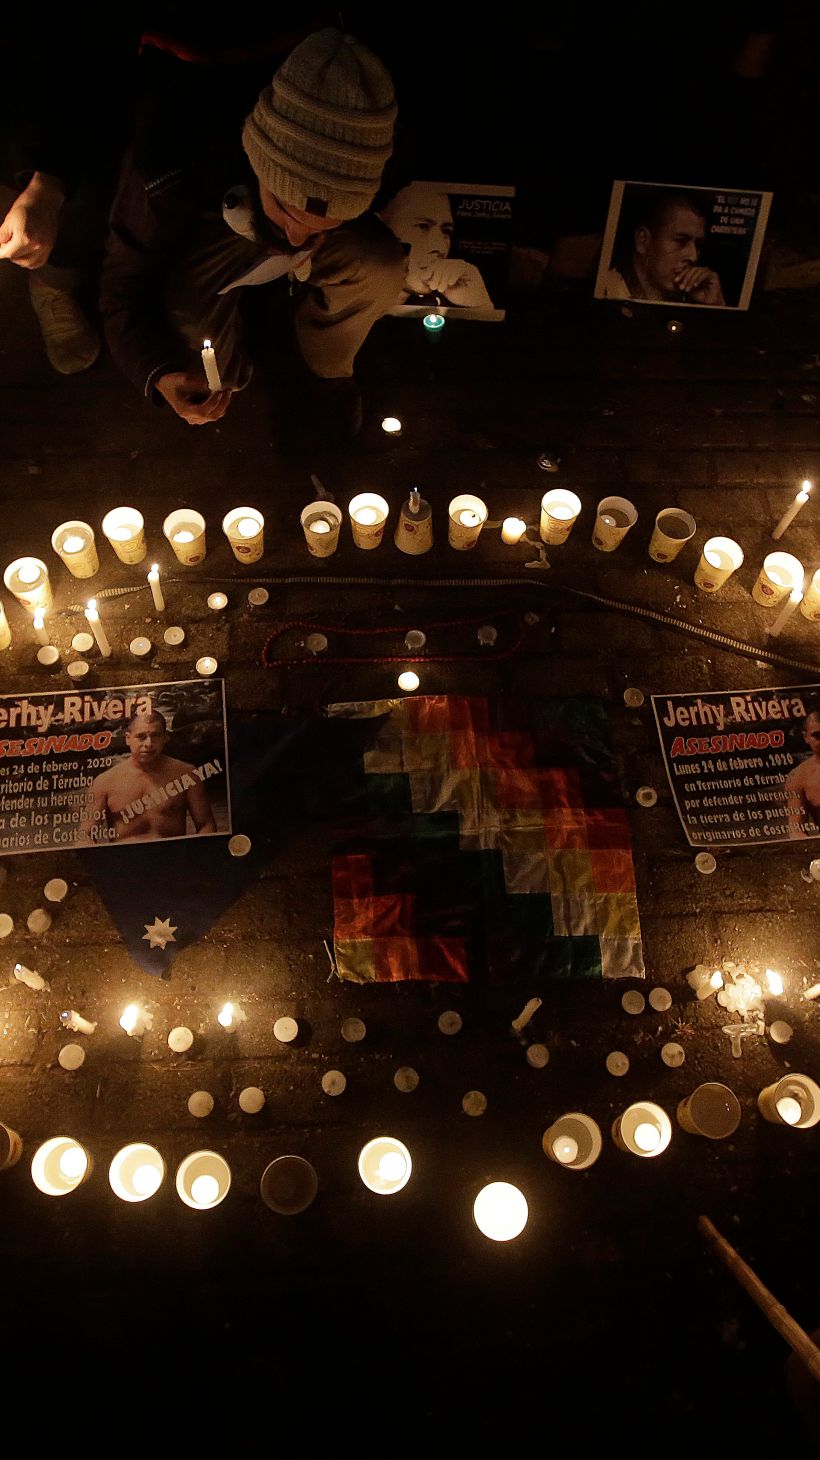 A photo of a vigil held to mourn the death of Jerhy Rivera with a circle of candles with photos of Jerhy Rivera in and around it, with people sitting around the circle..